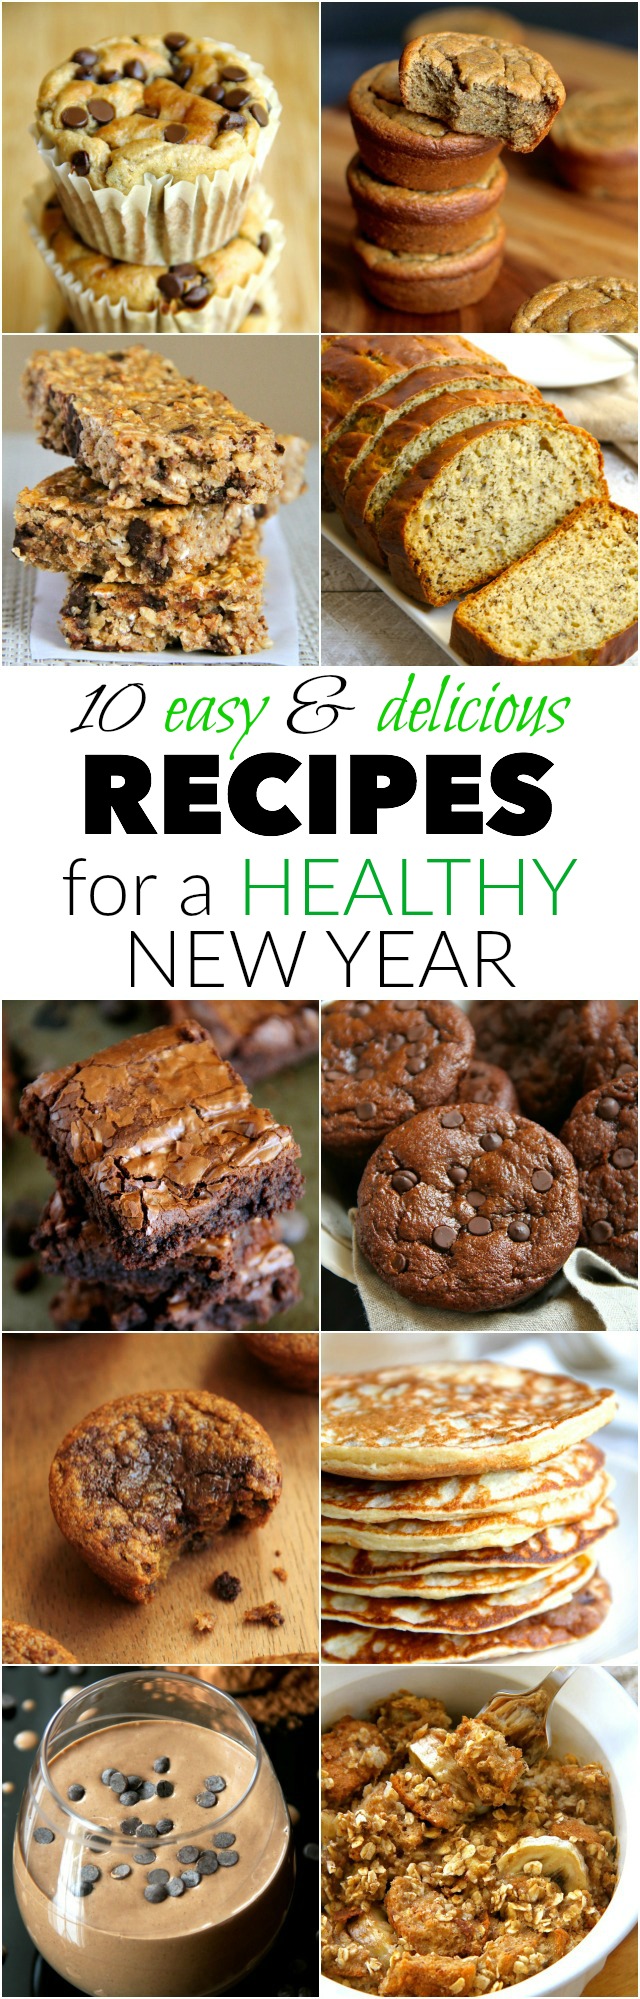 10 Easy and Delicious Recipes for a Healthy New Year | runningwithspoons.com